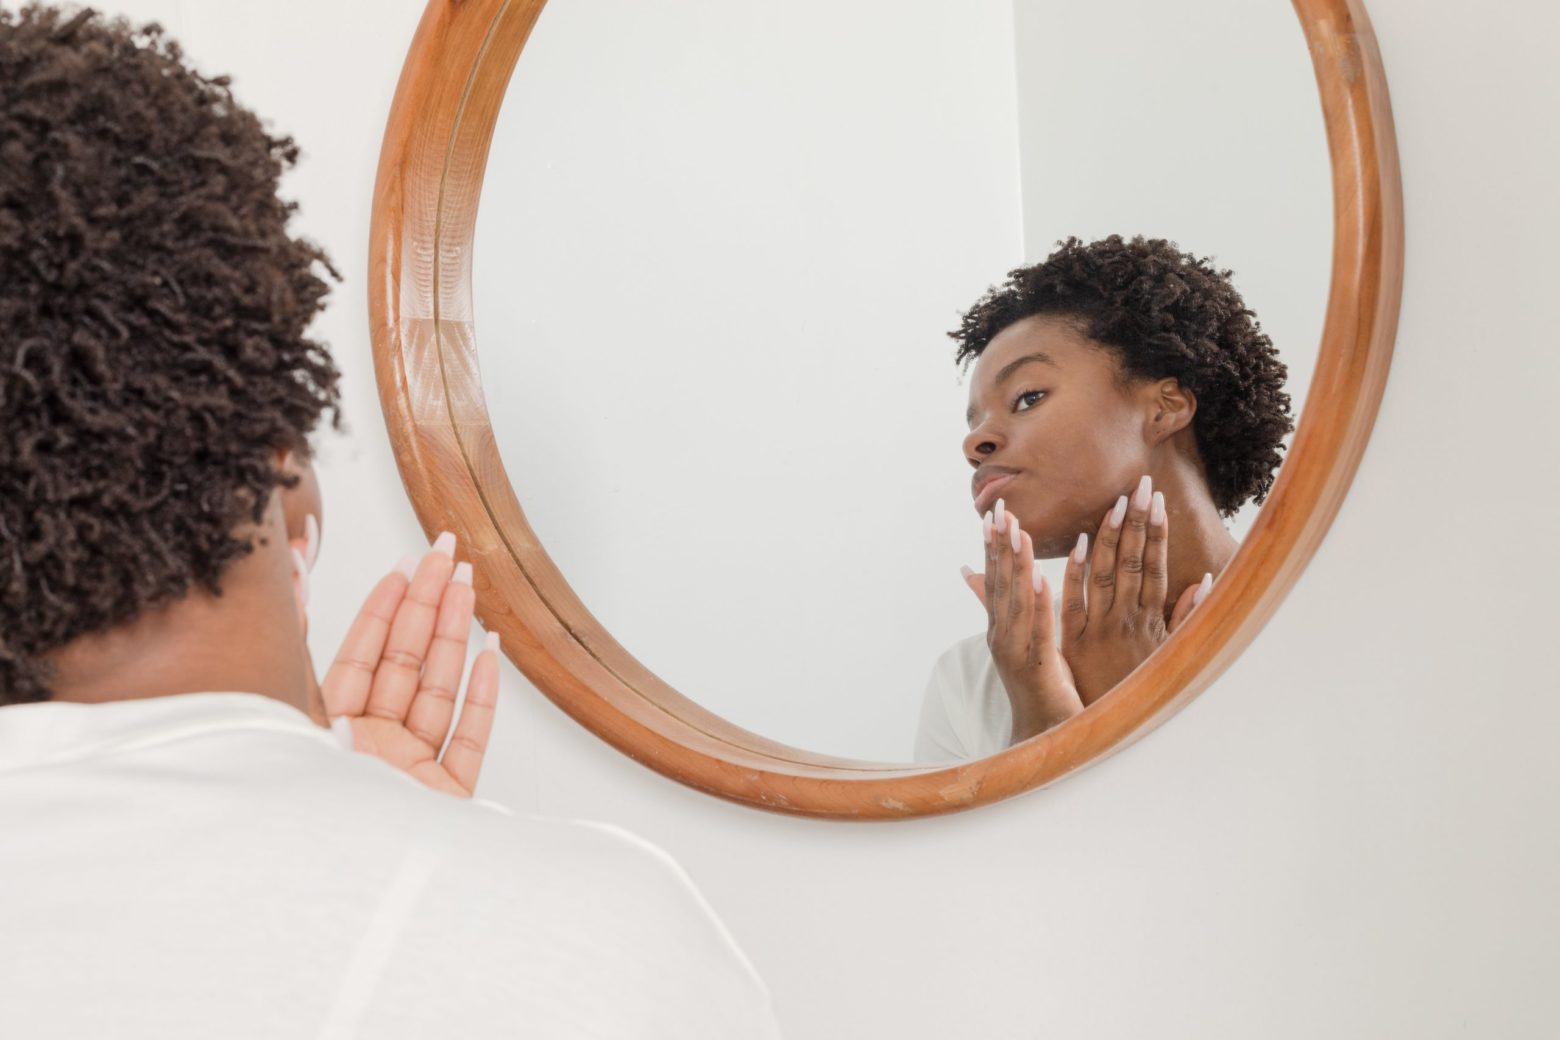 What Exactly is Melasma And How Does It Impact Black Women?